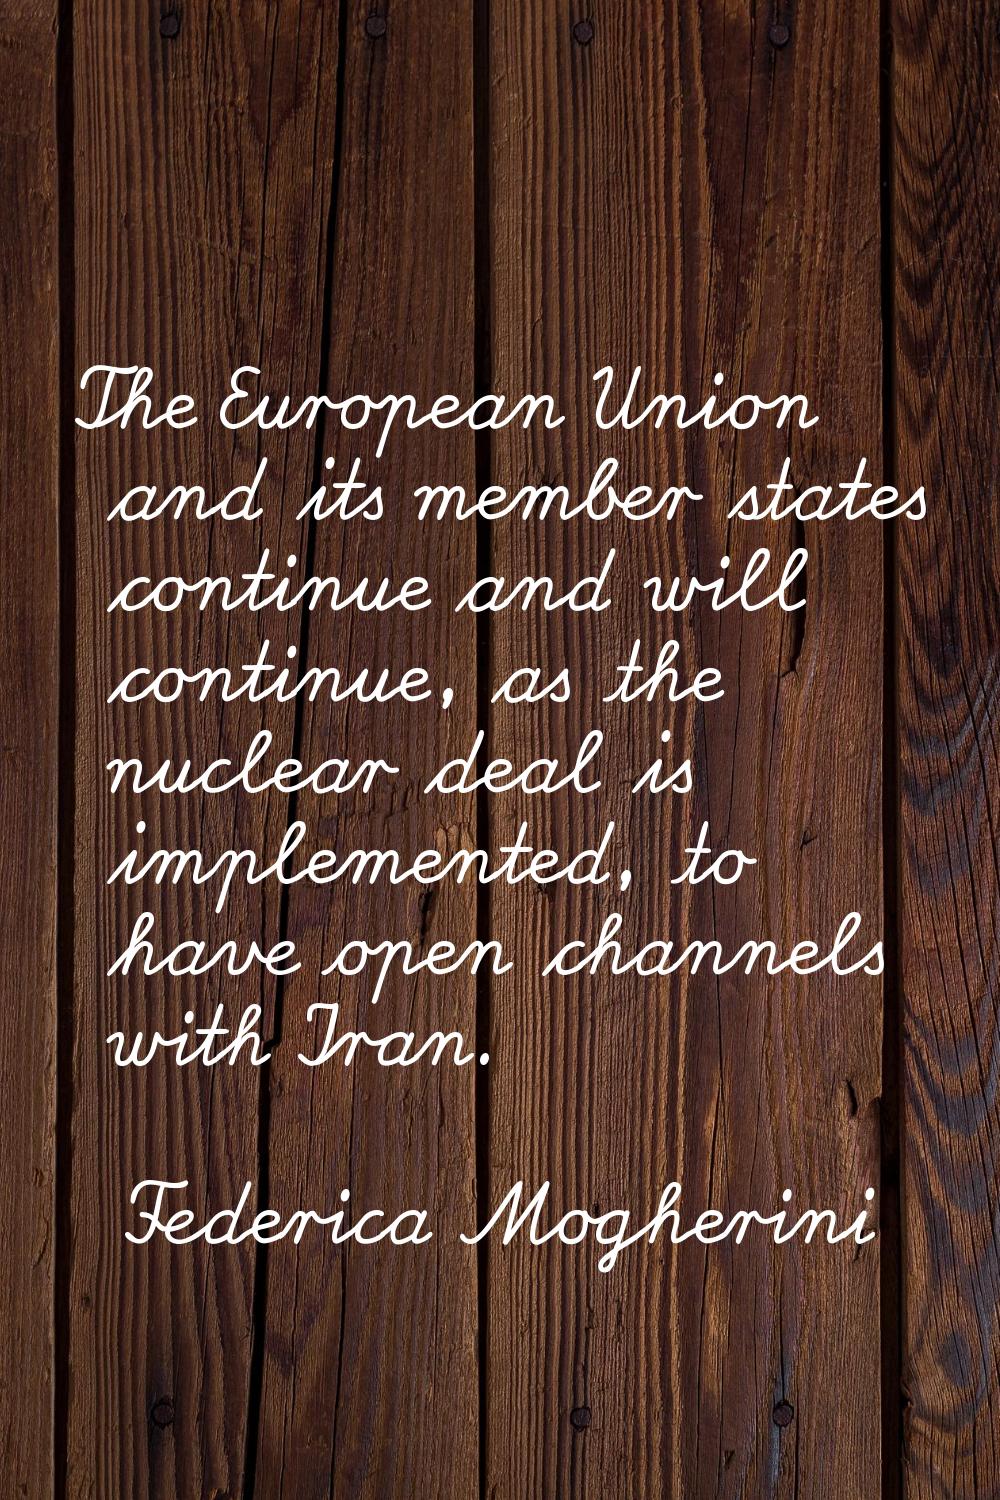 The European Union and its member states continue and will continue, as the nuclear deal is impleme